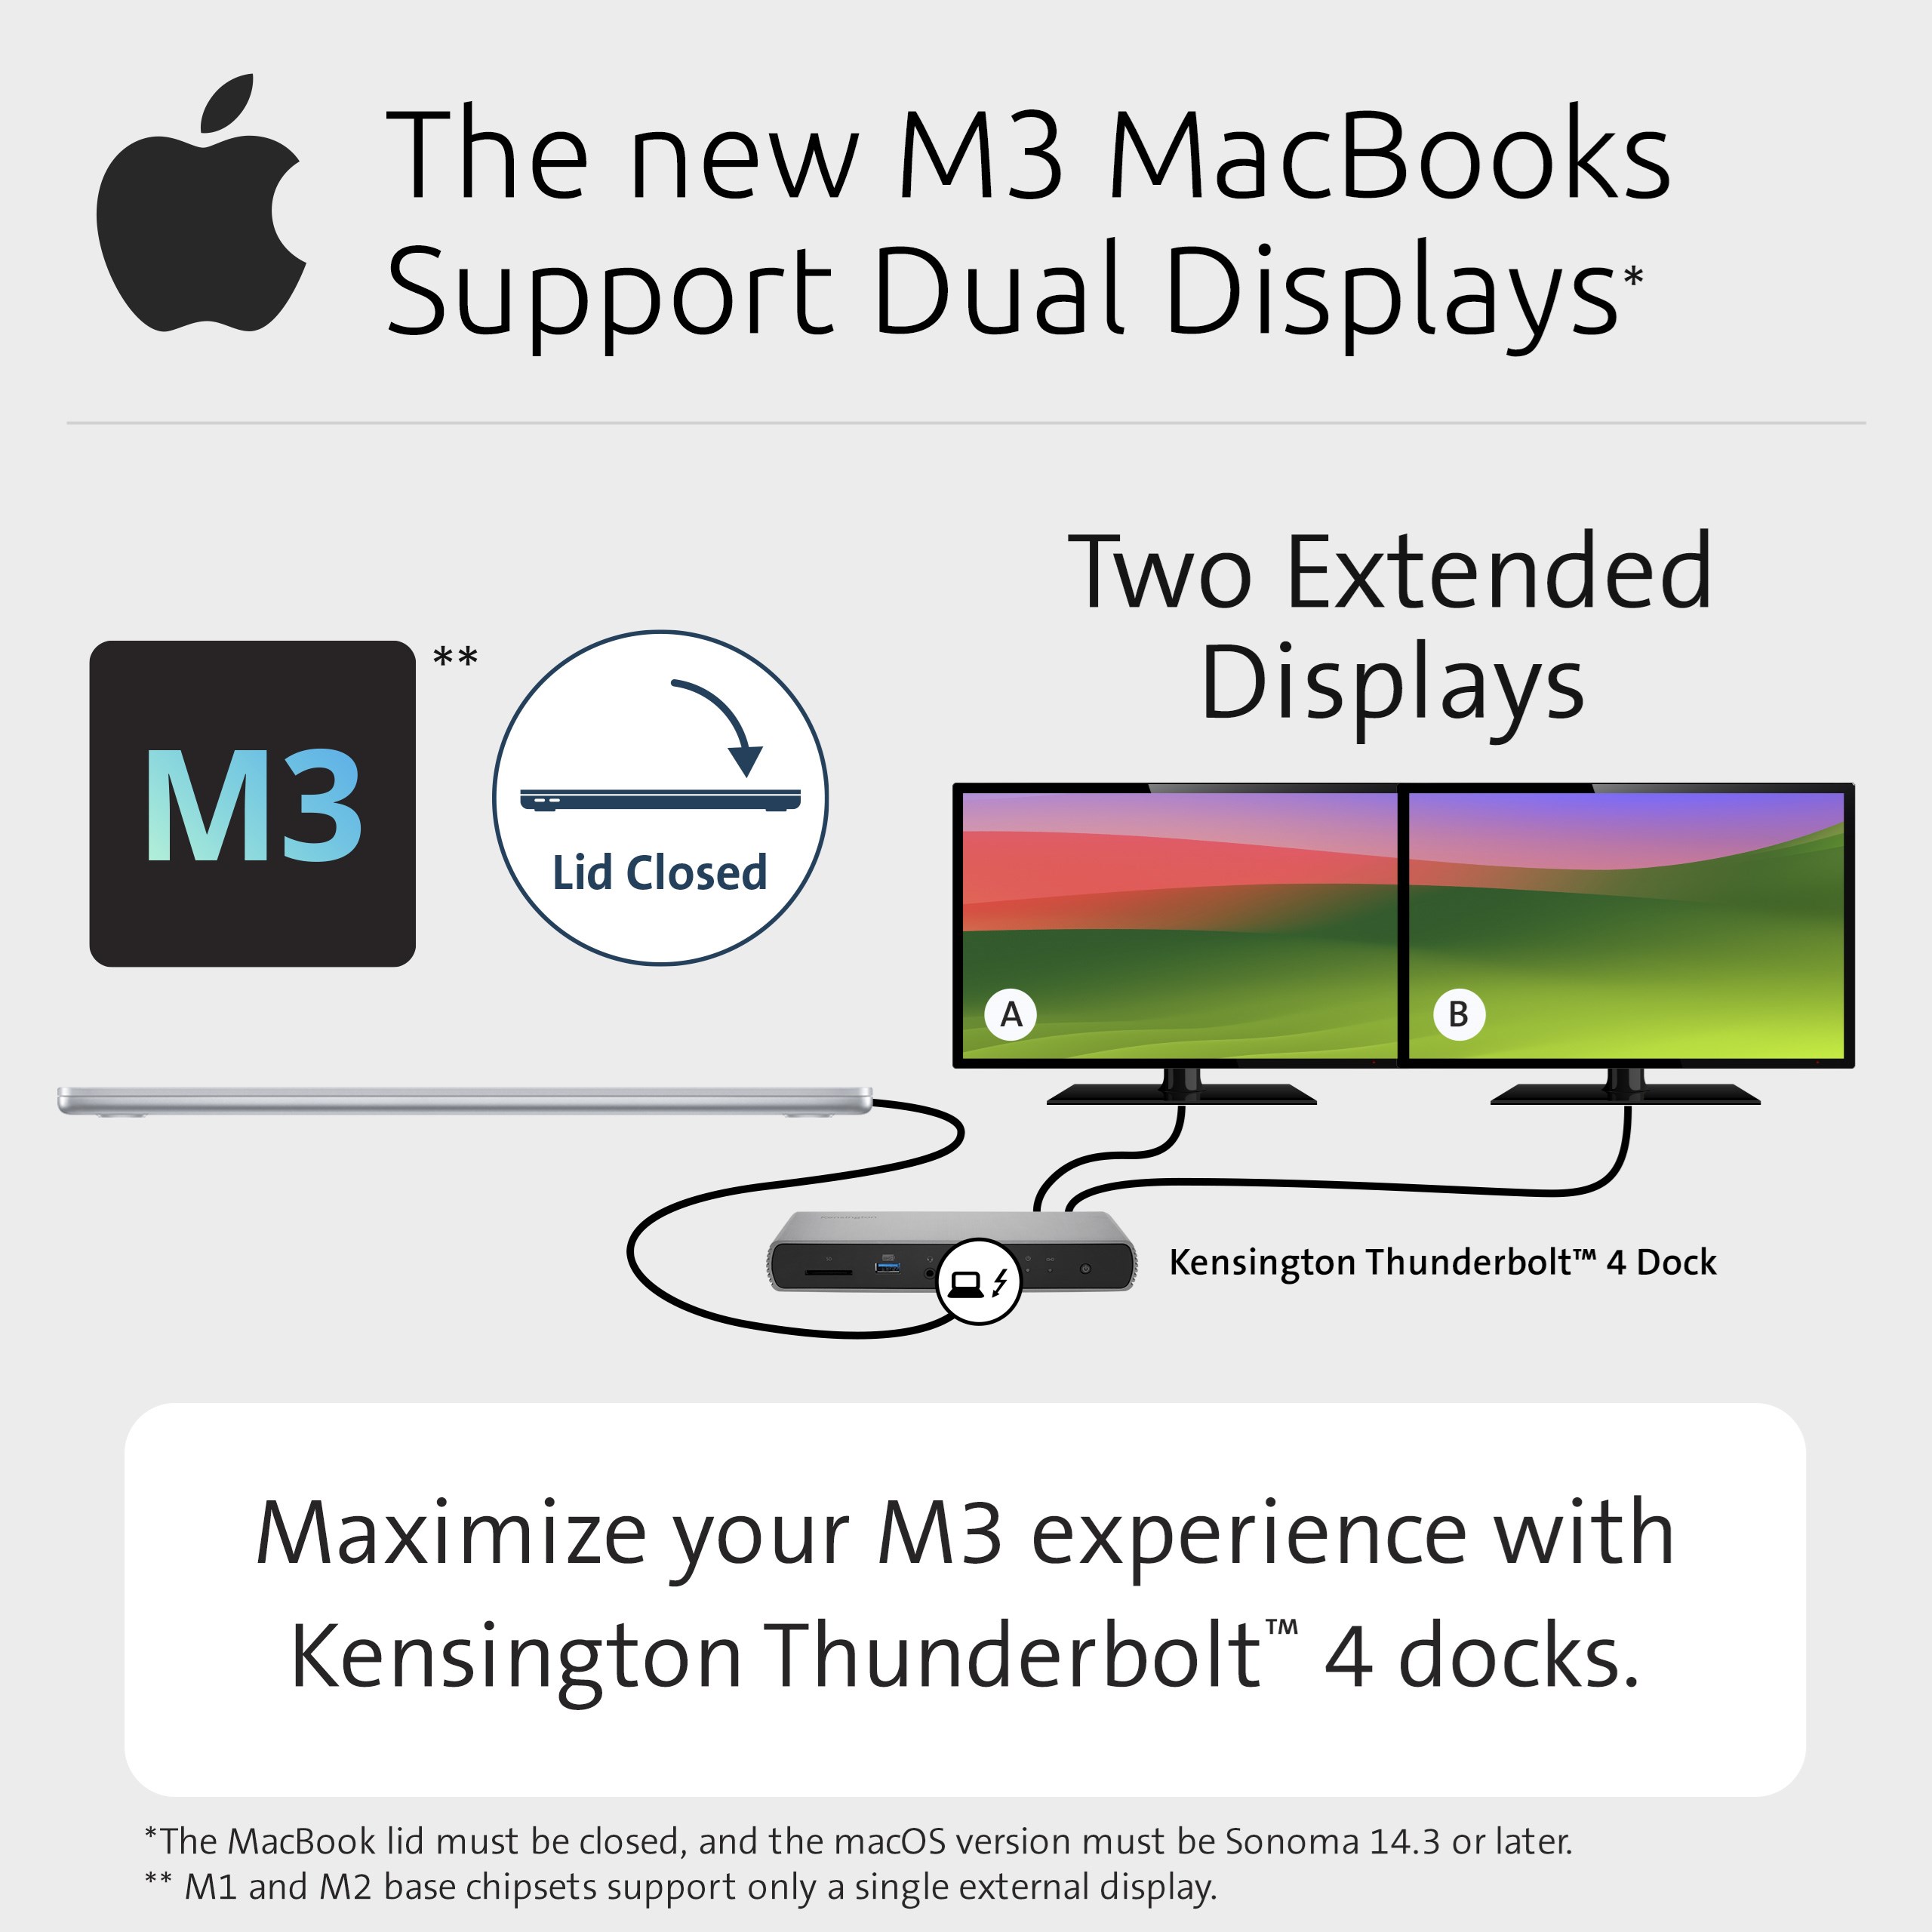 Maximize your M3 experience with Kensington Thunderbolt docking stations.